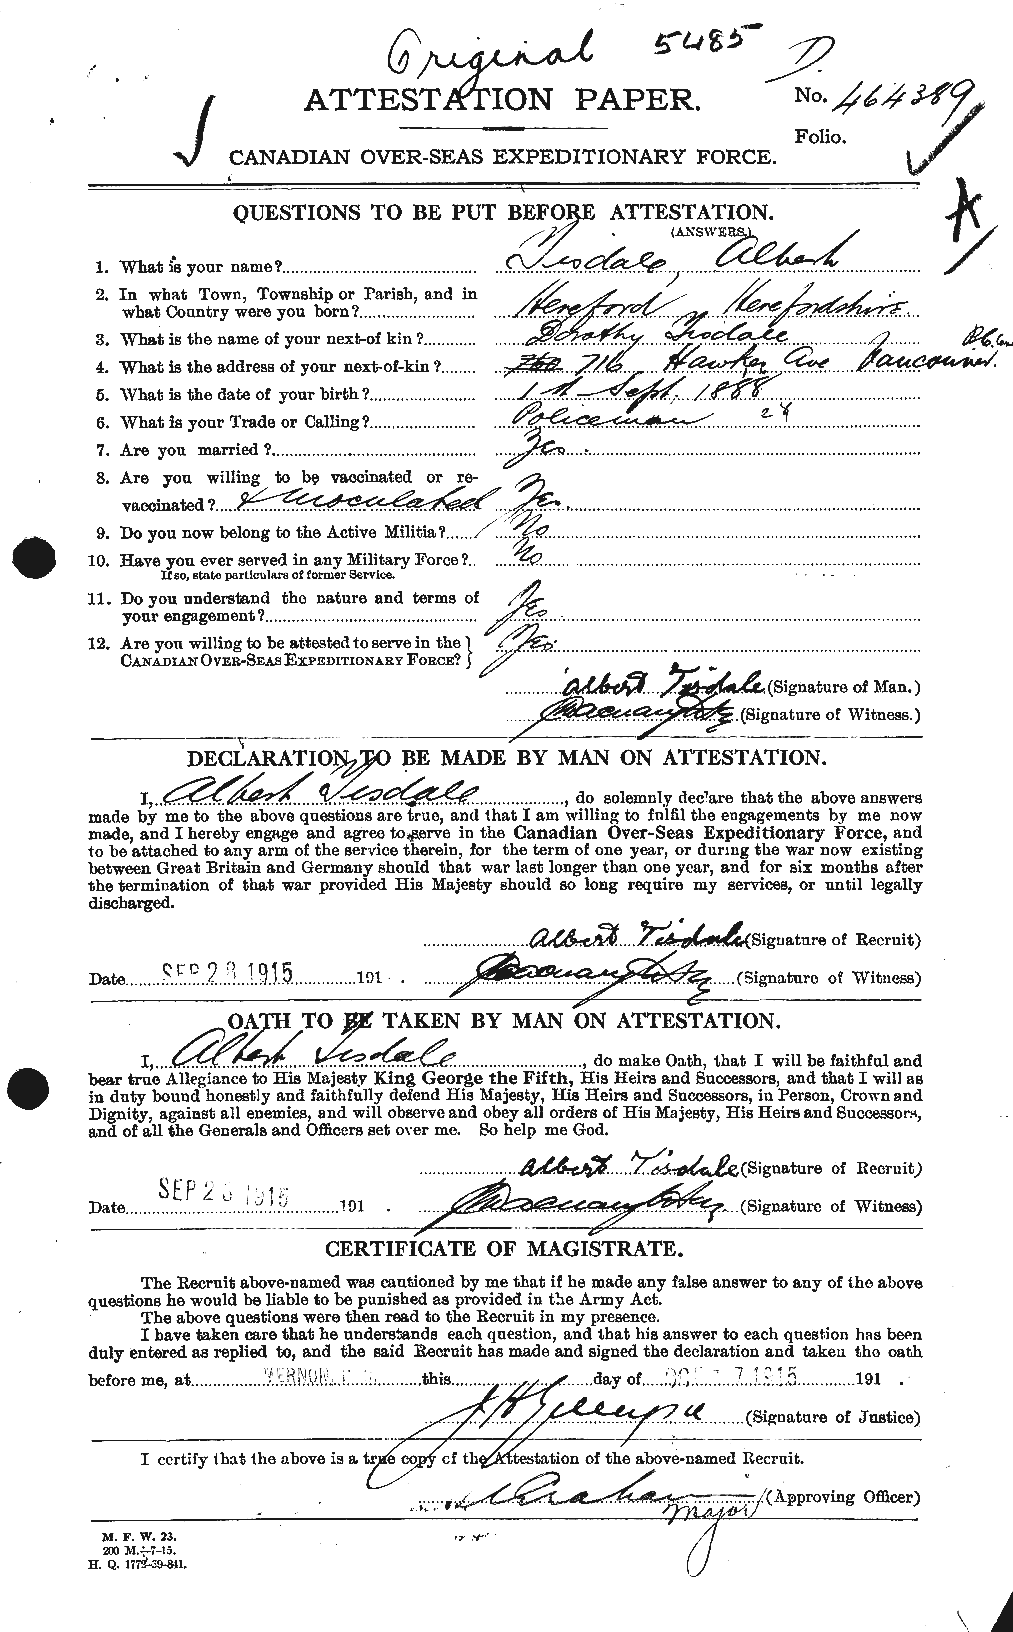 Personnel Records of the First World War - CEF 634834a